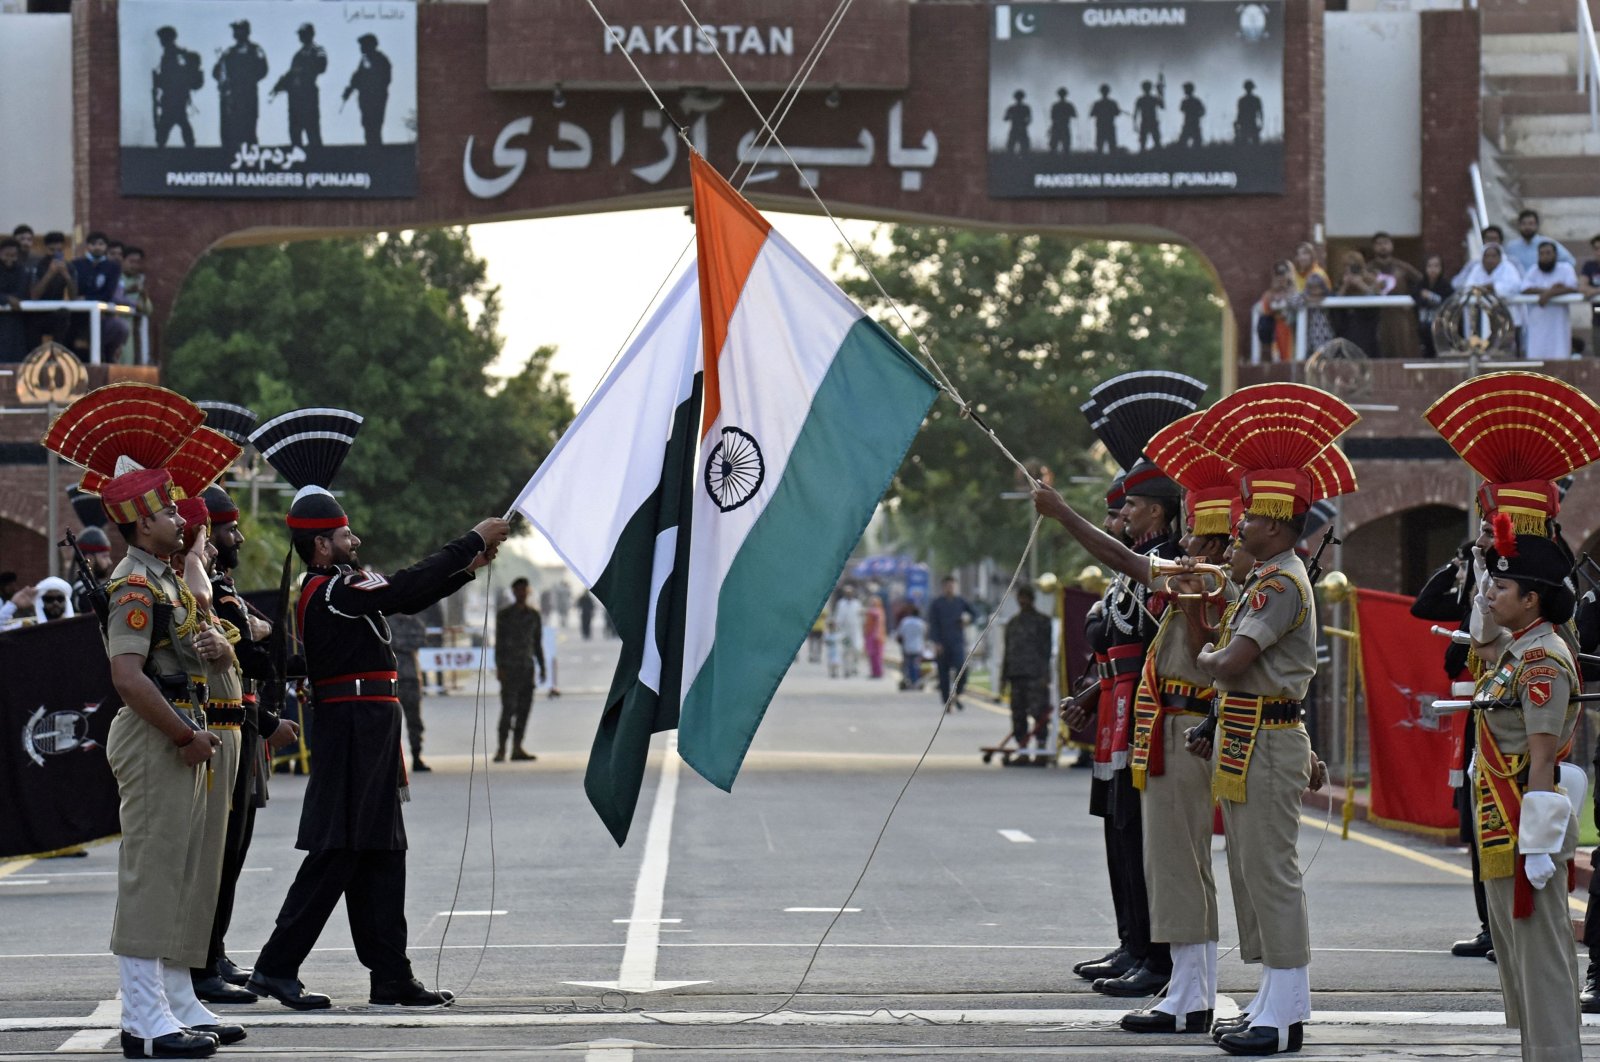 Indian Border Security Force (BSF) soldiers (in brown) and Pakistani Rangers take part in the Beating the Retreat ceremony at the India-Pakistan Wagah border post, about 35 kilometers from Amritsar, India, Aug. 1, 2022. (AFP Photo)